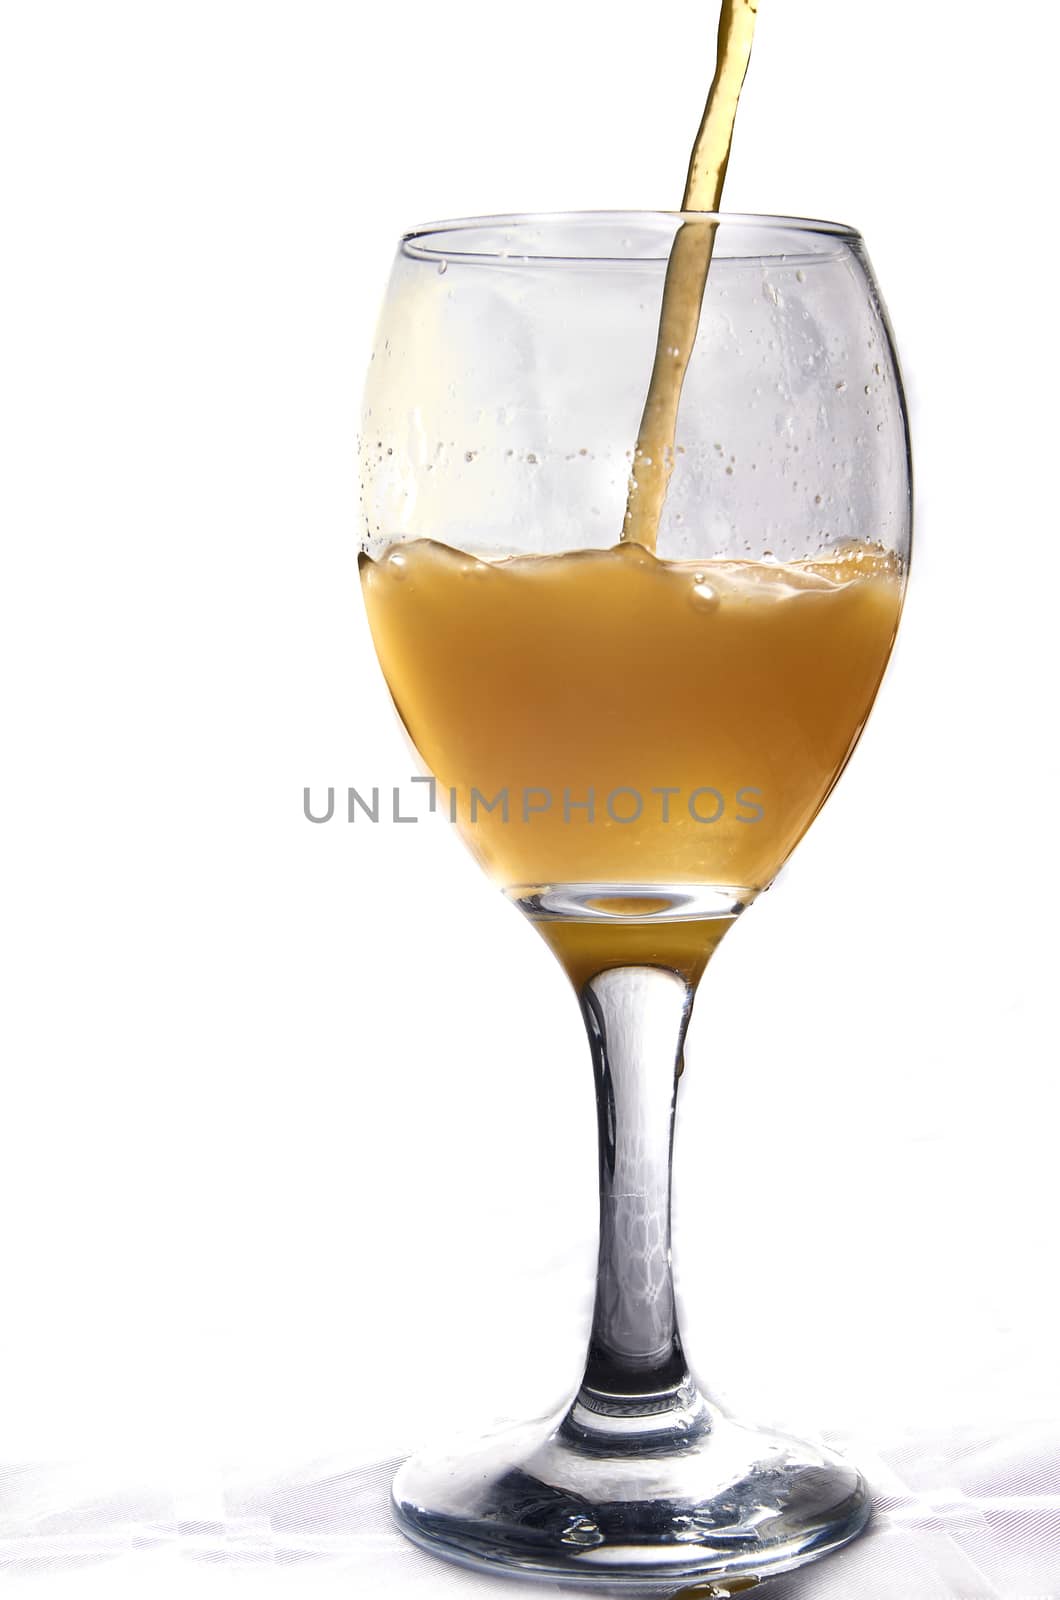 Natural orange juice from Valencia falling inside a glass cup